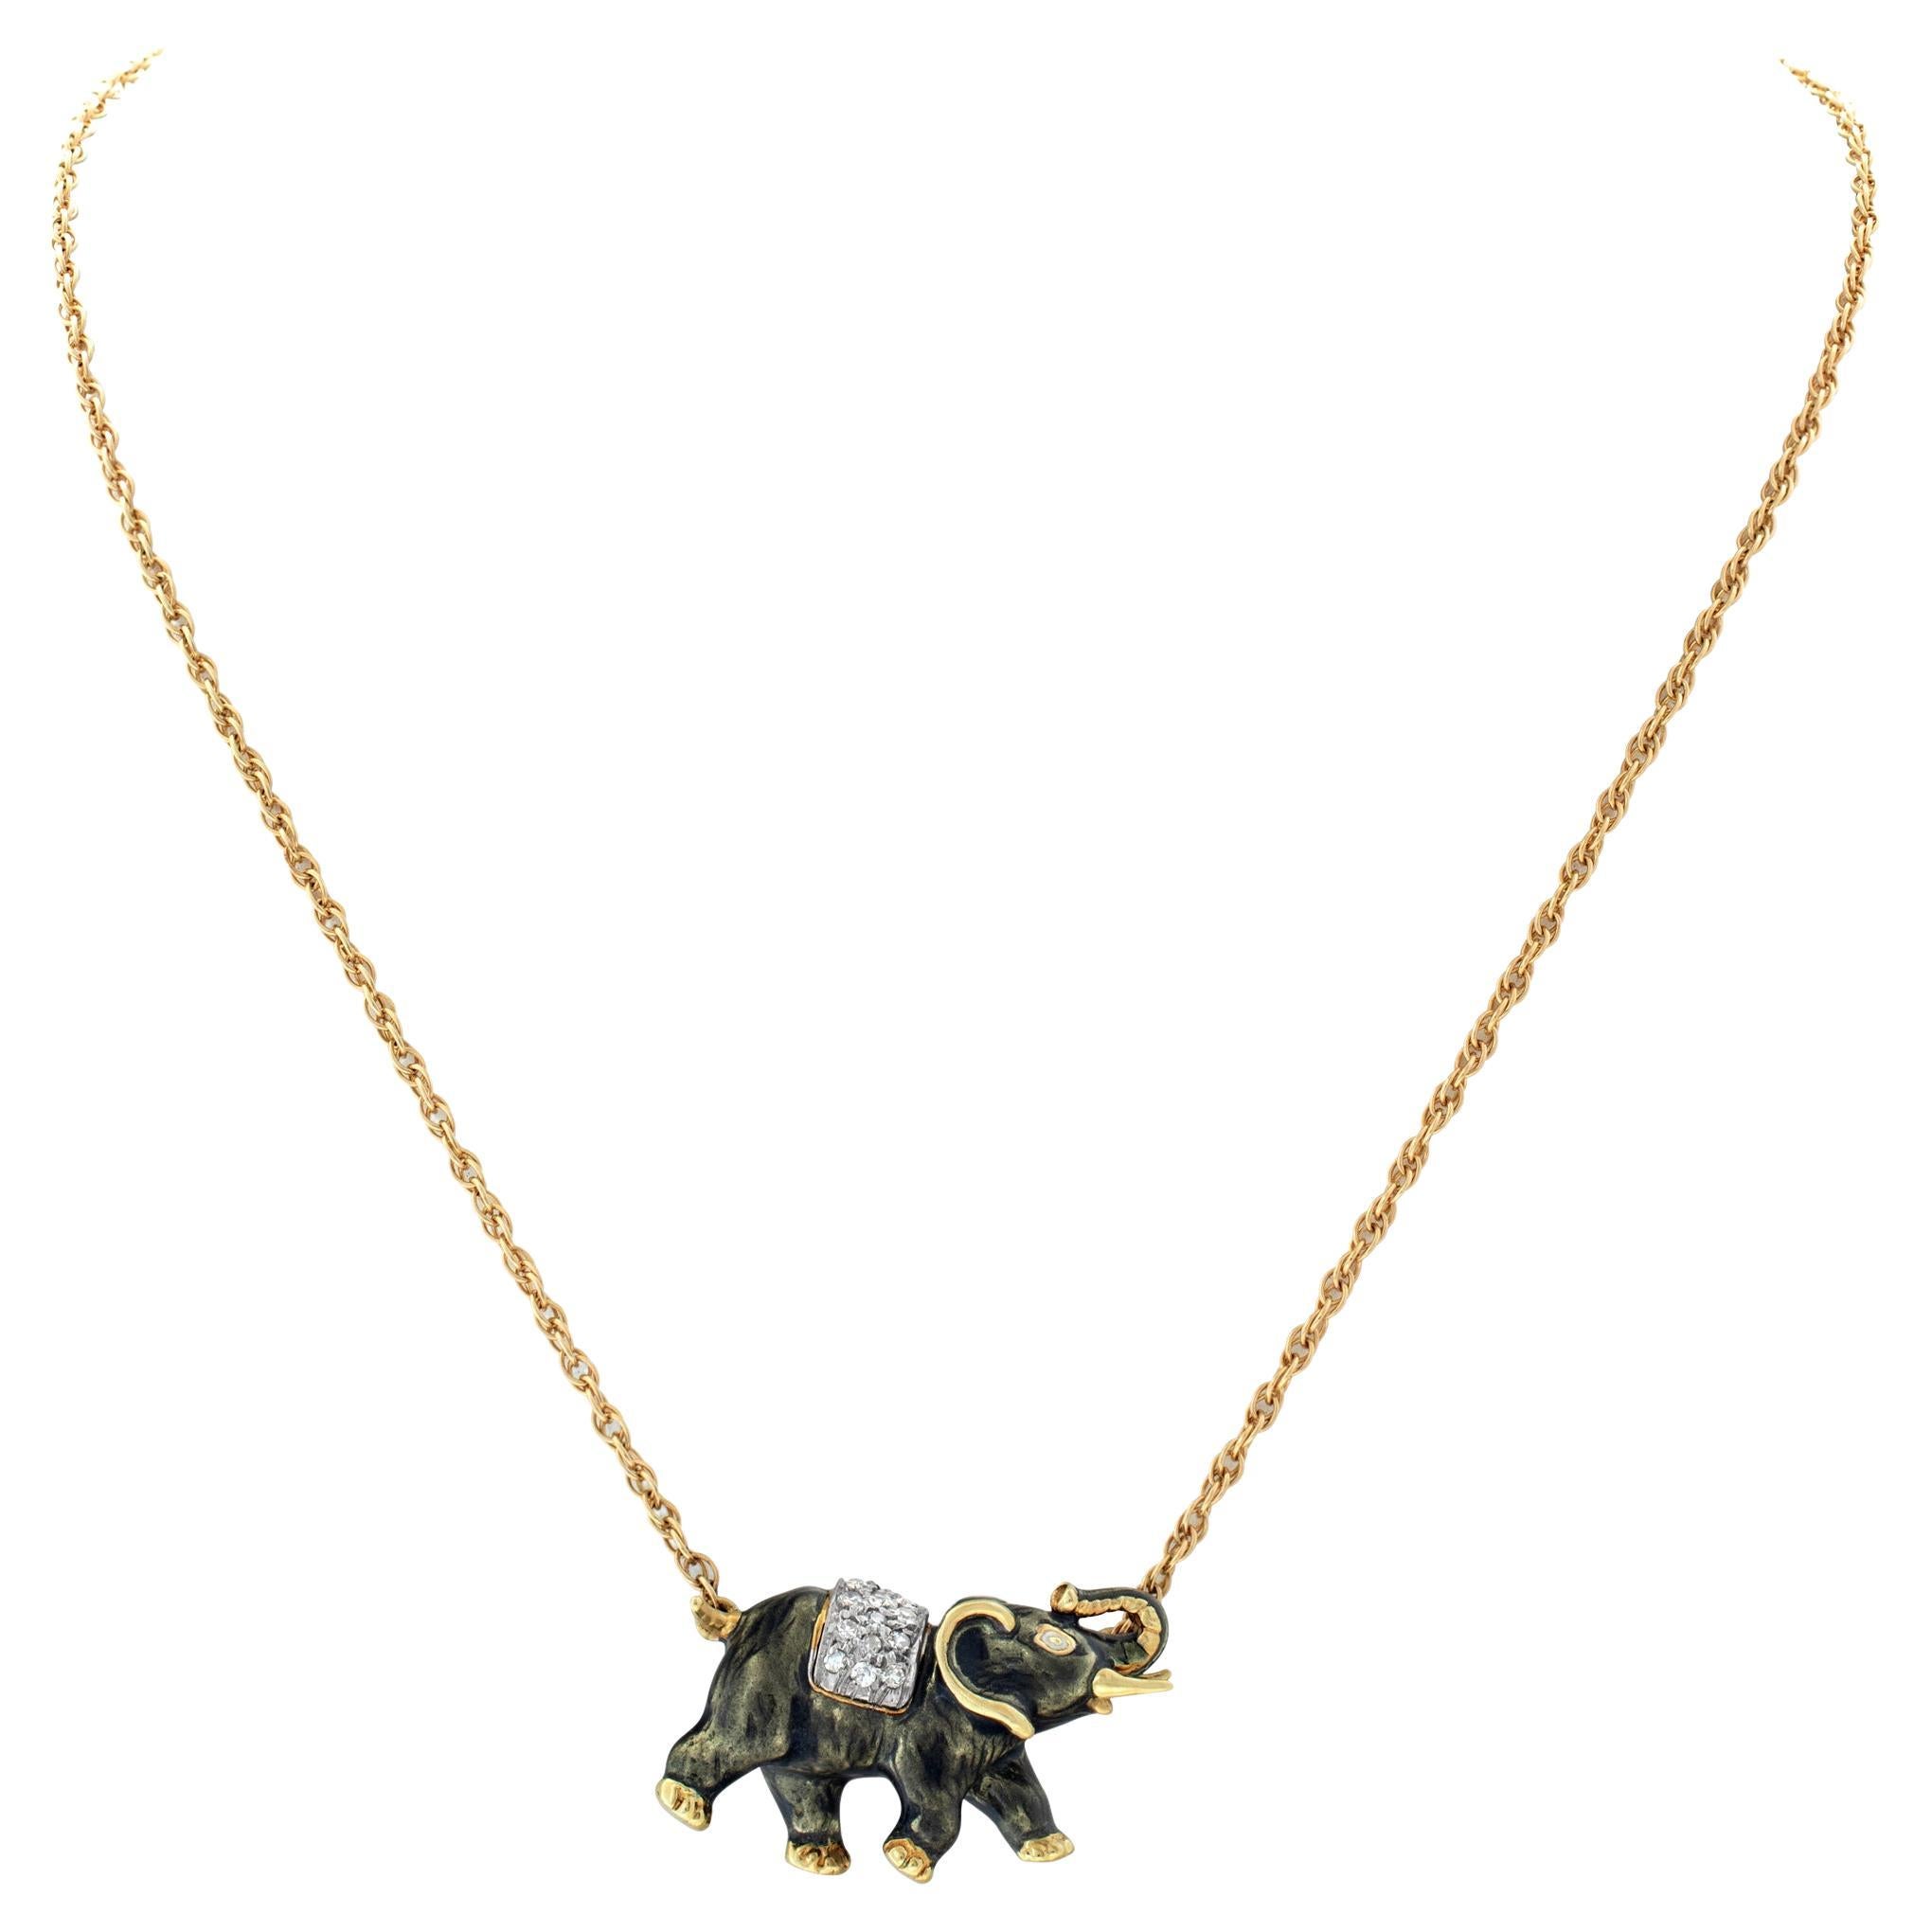 Elephant necklace in 14k gold with 0.25 carats in diamond accents G-H color,